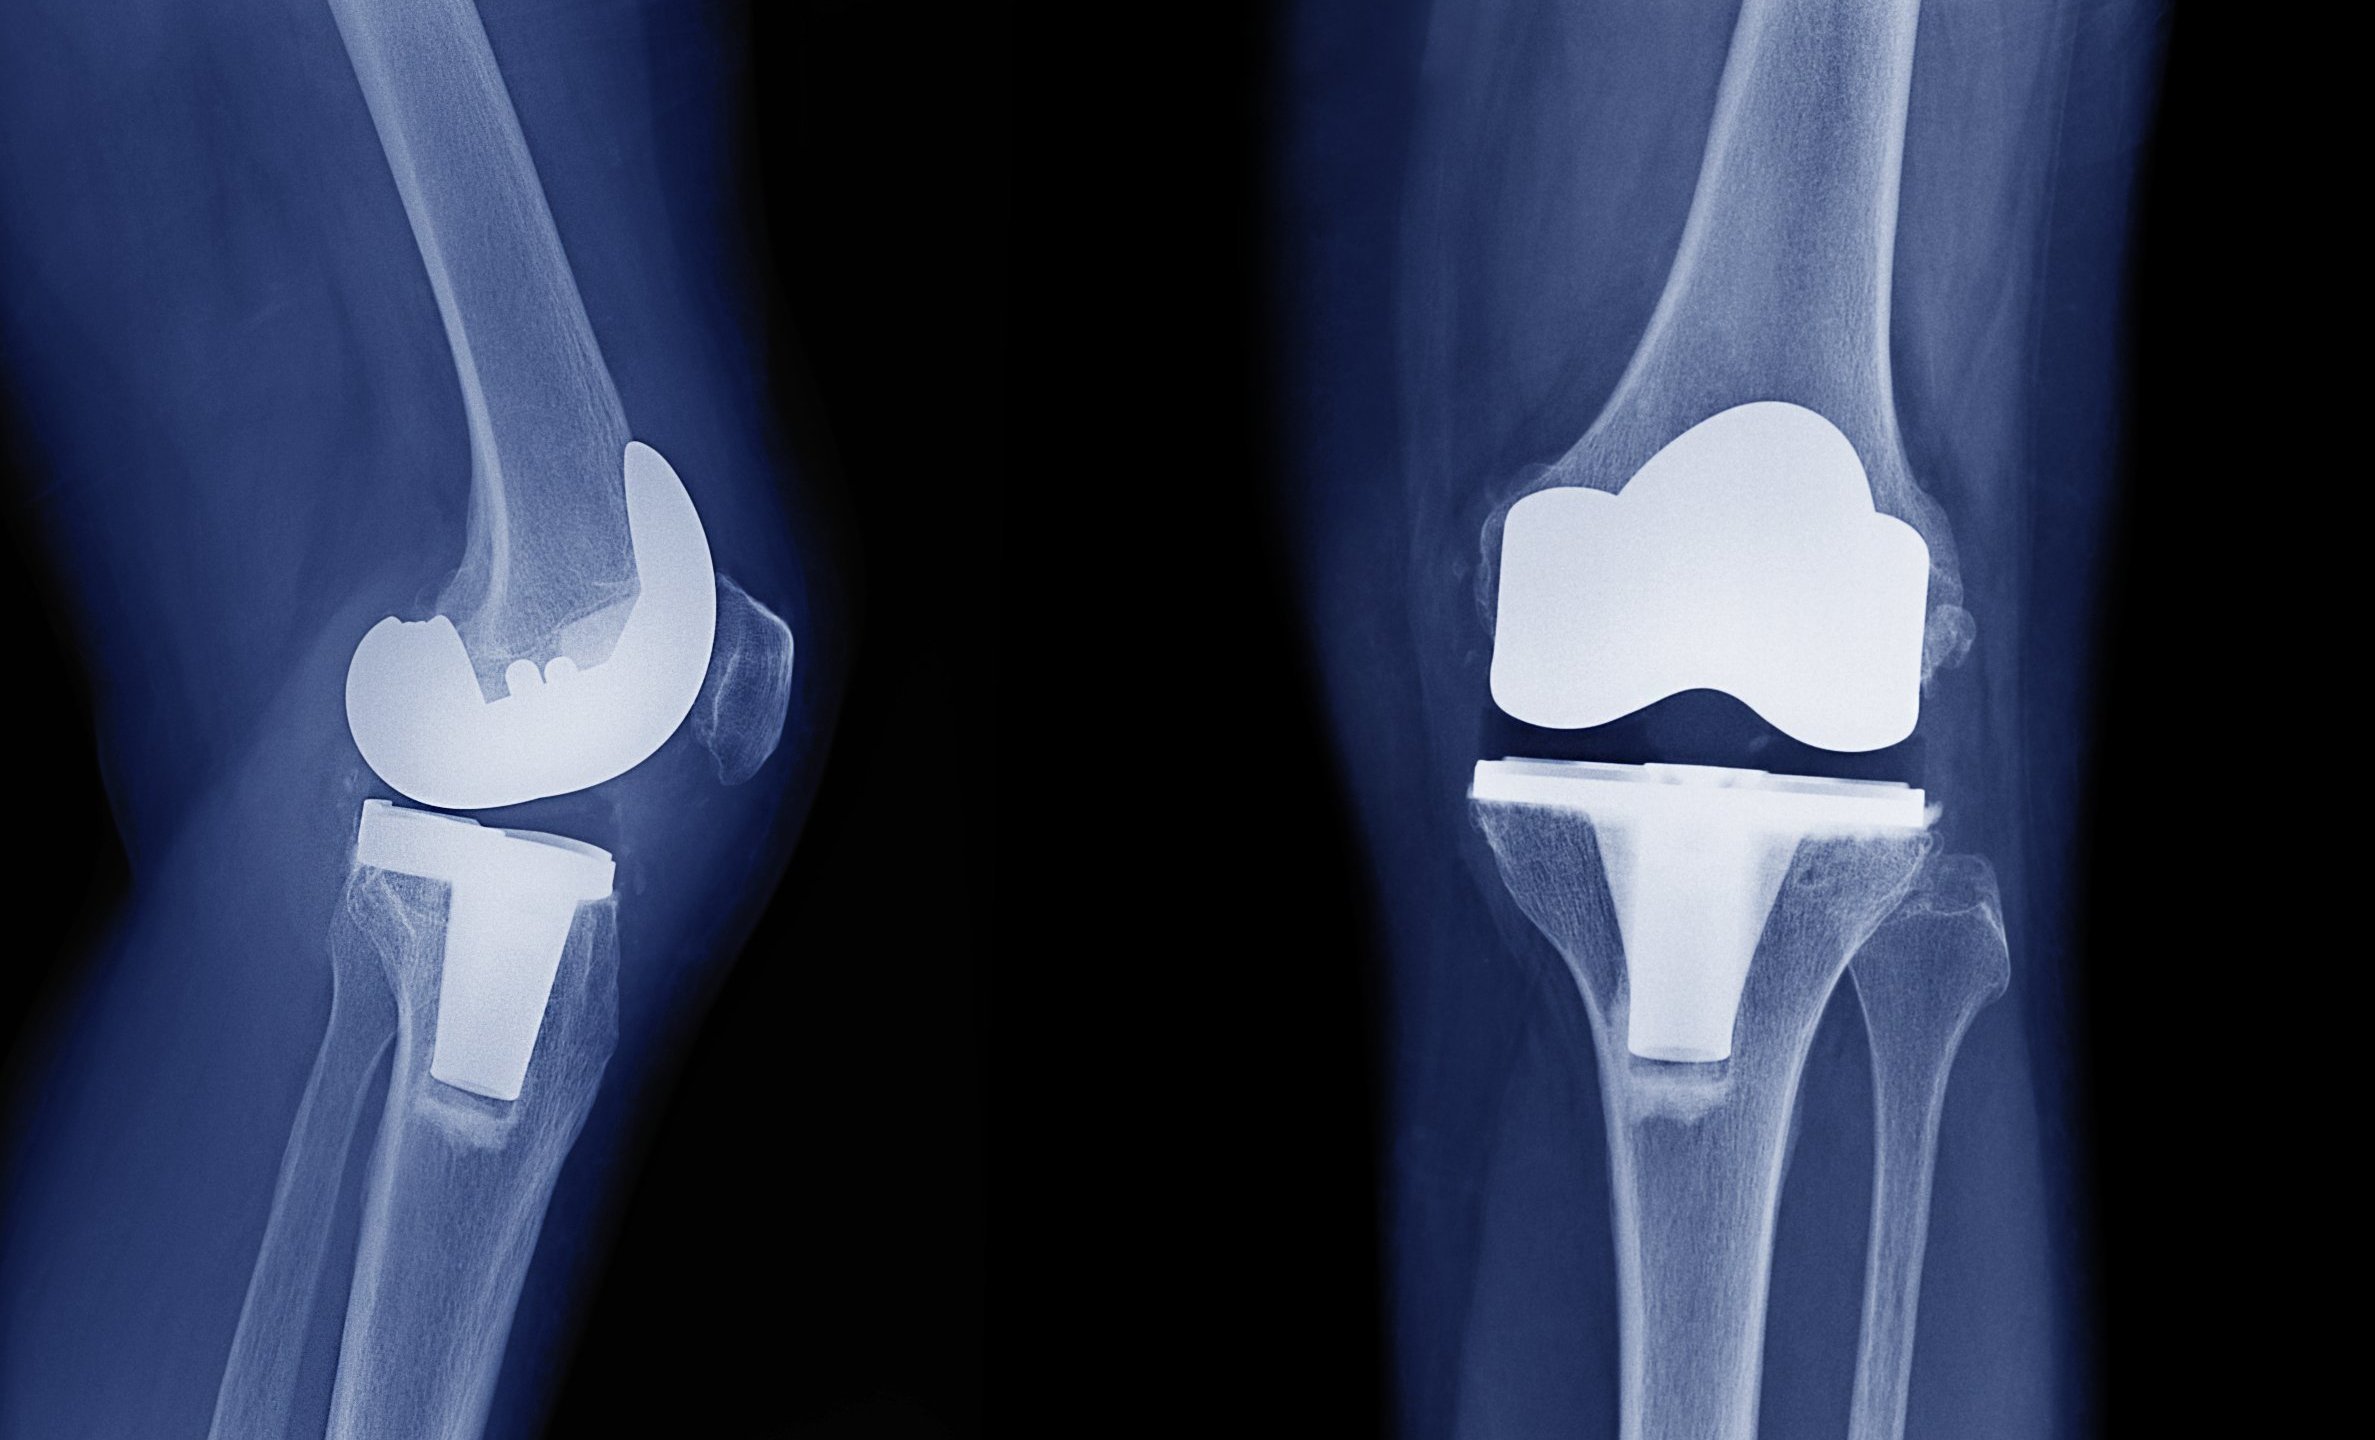 Total Knee Replacement BL, Singapore